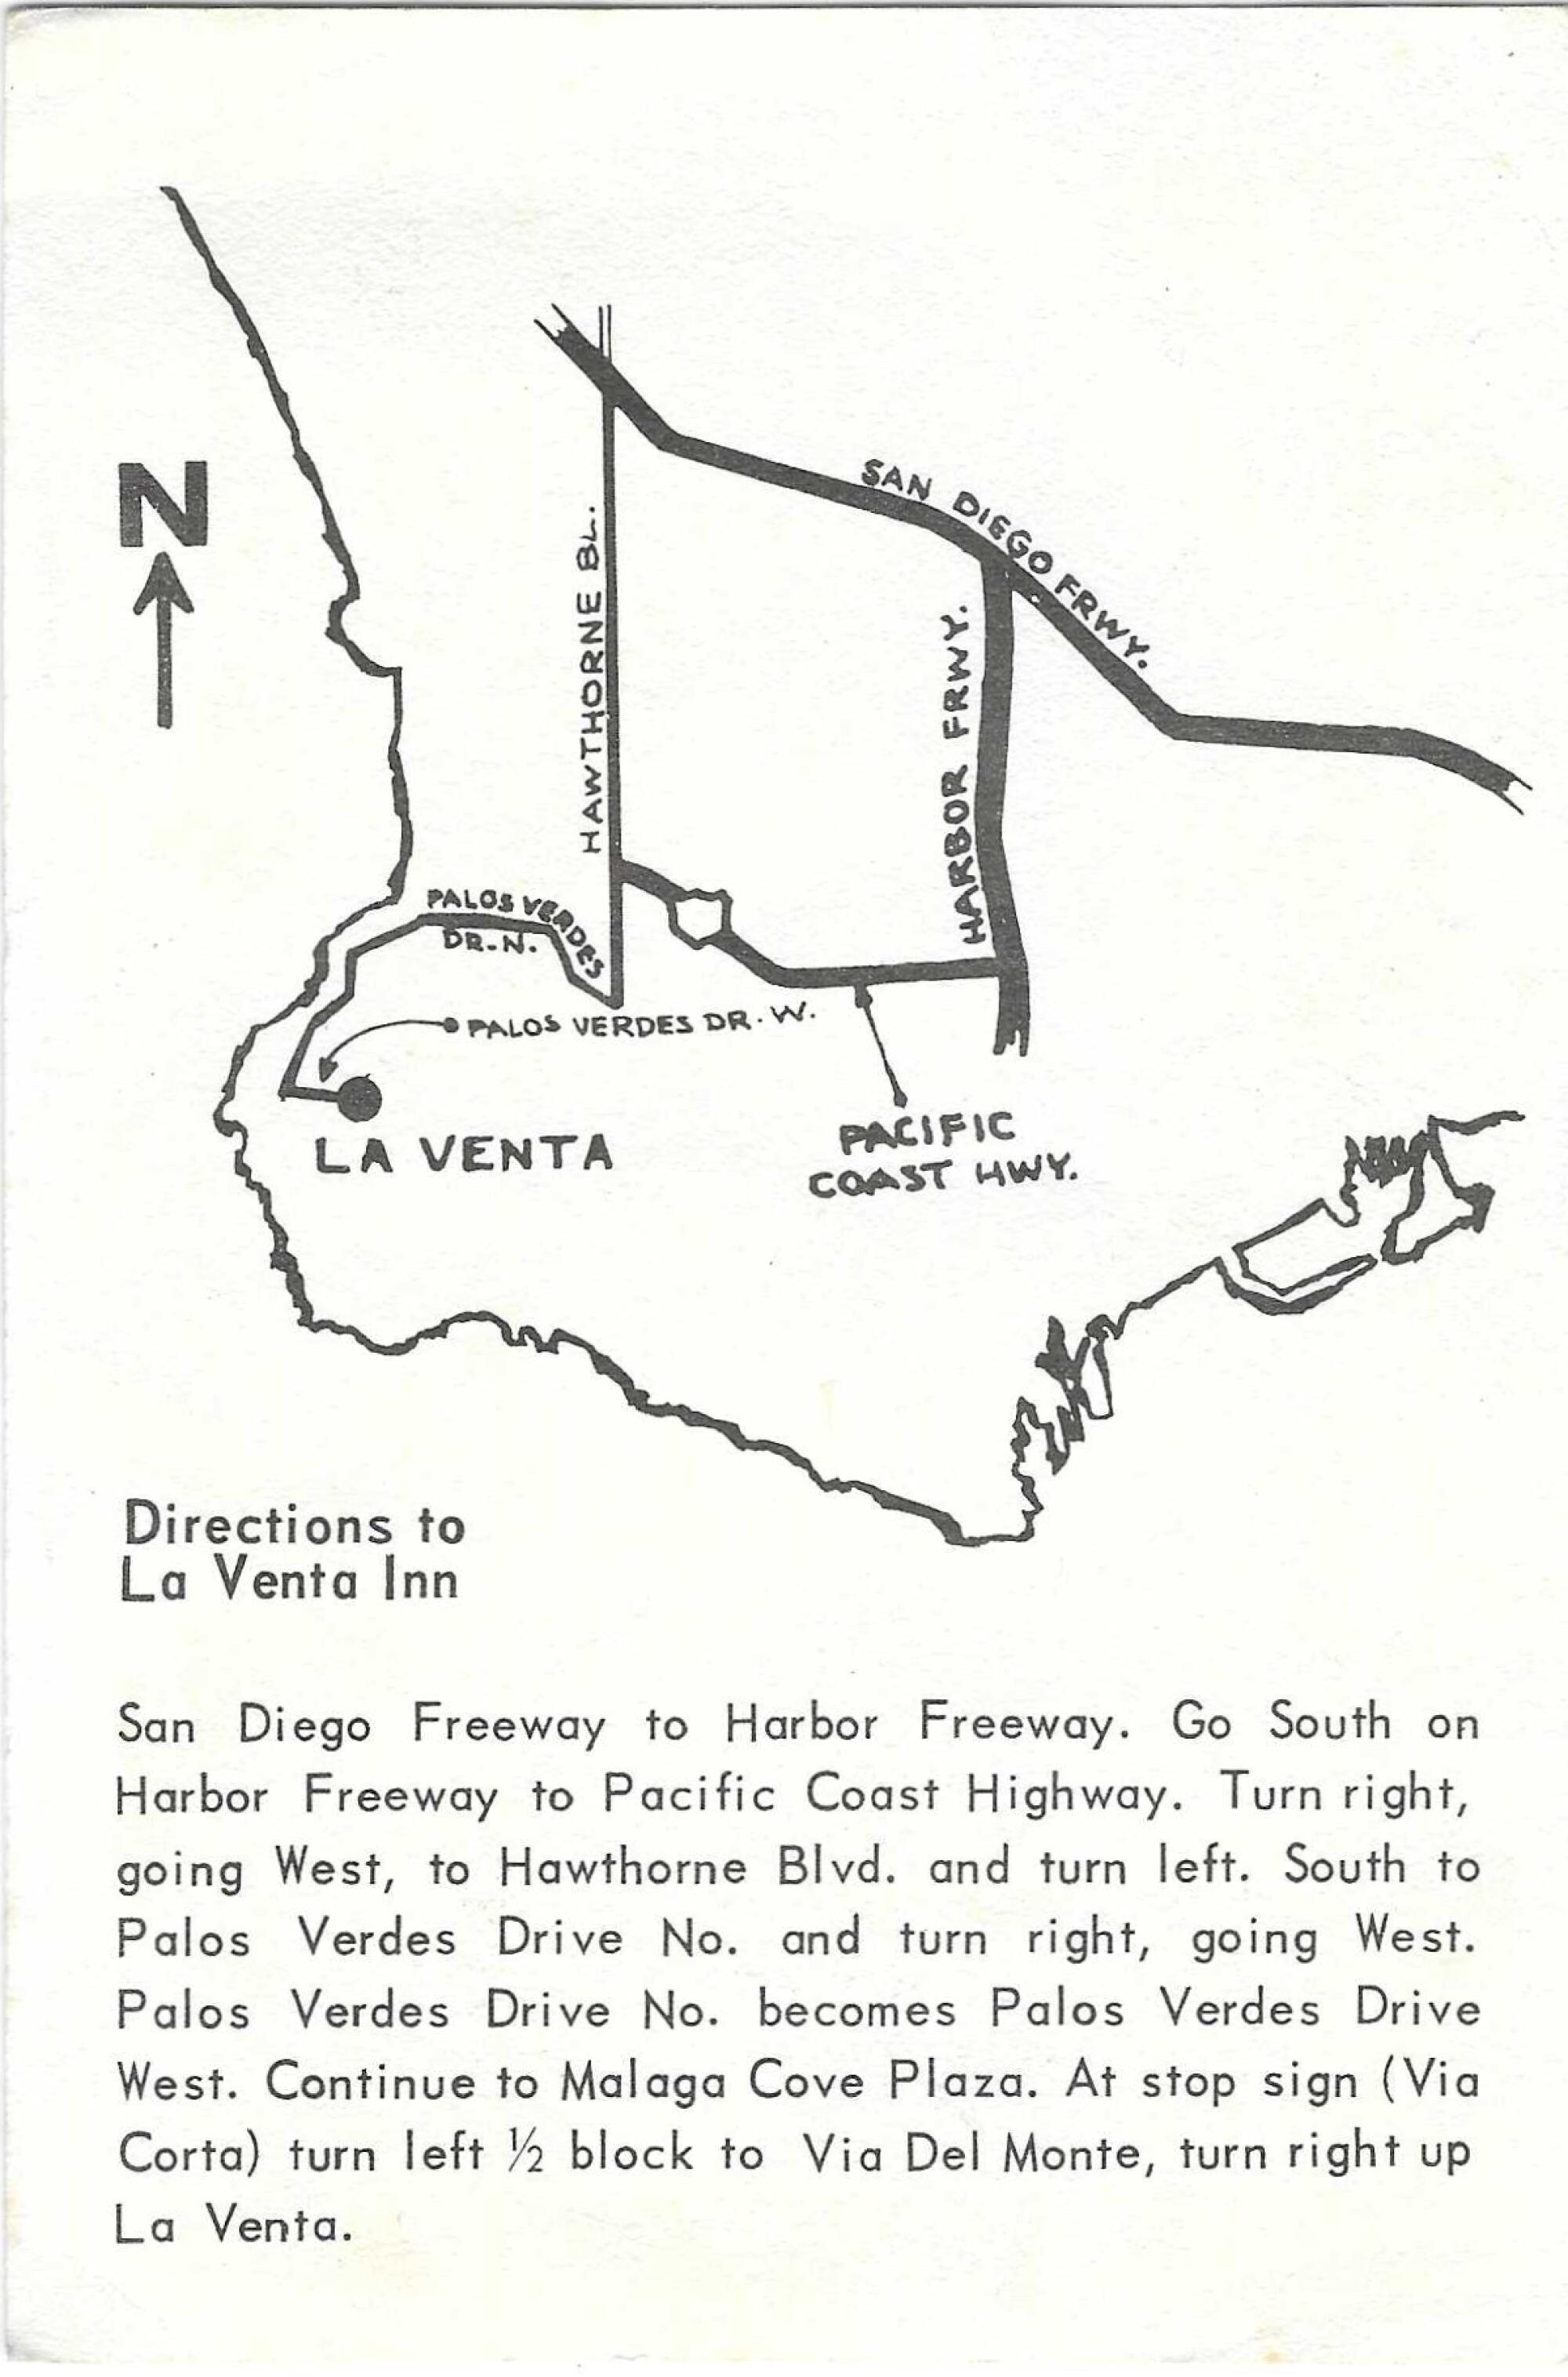 Map of Palos Verdes Peninsula, South Bay and port area, with written directions to La Venta Inn